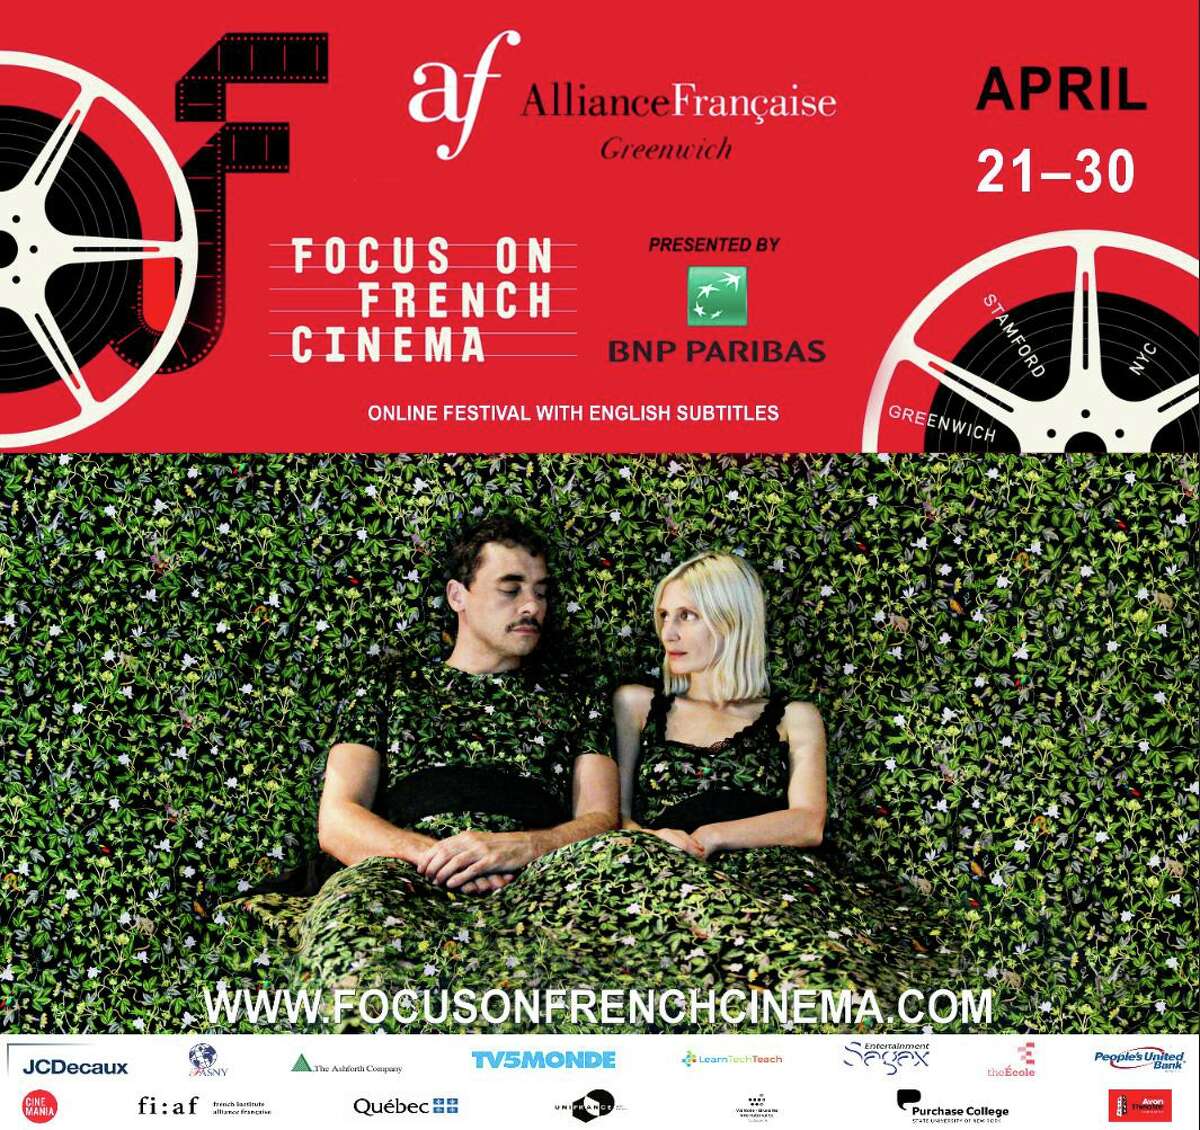 Focus on French Cinema, the annual Francophone film festival presented by the Alliance Française of Greenwich, will take place virtually this year, screening 10 premiere films in French with English subtitles from April 21- April 30, 2021.